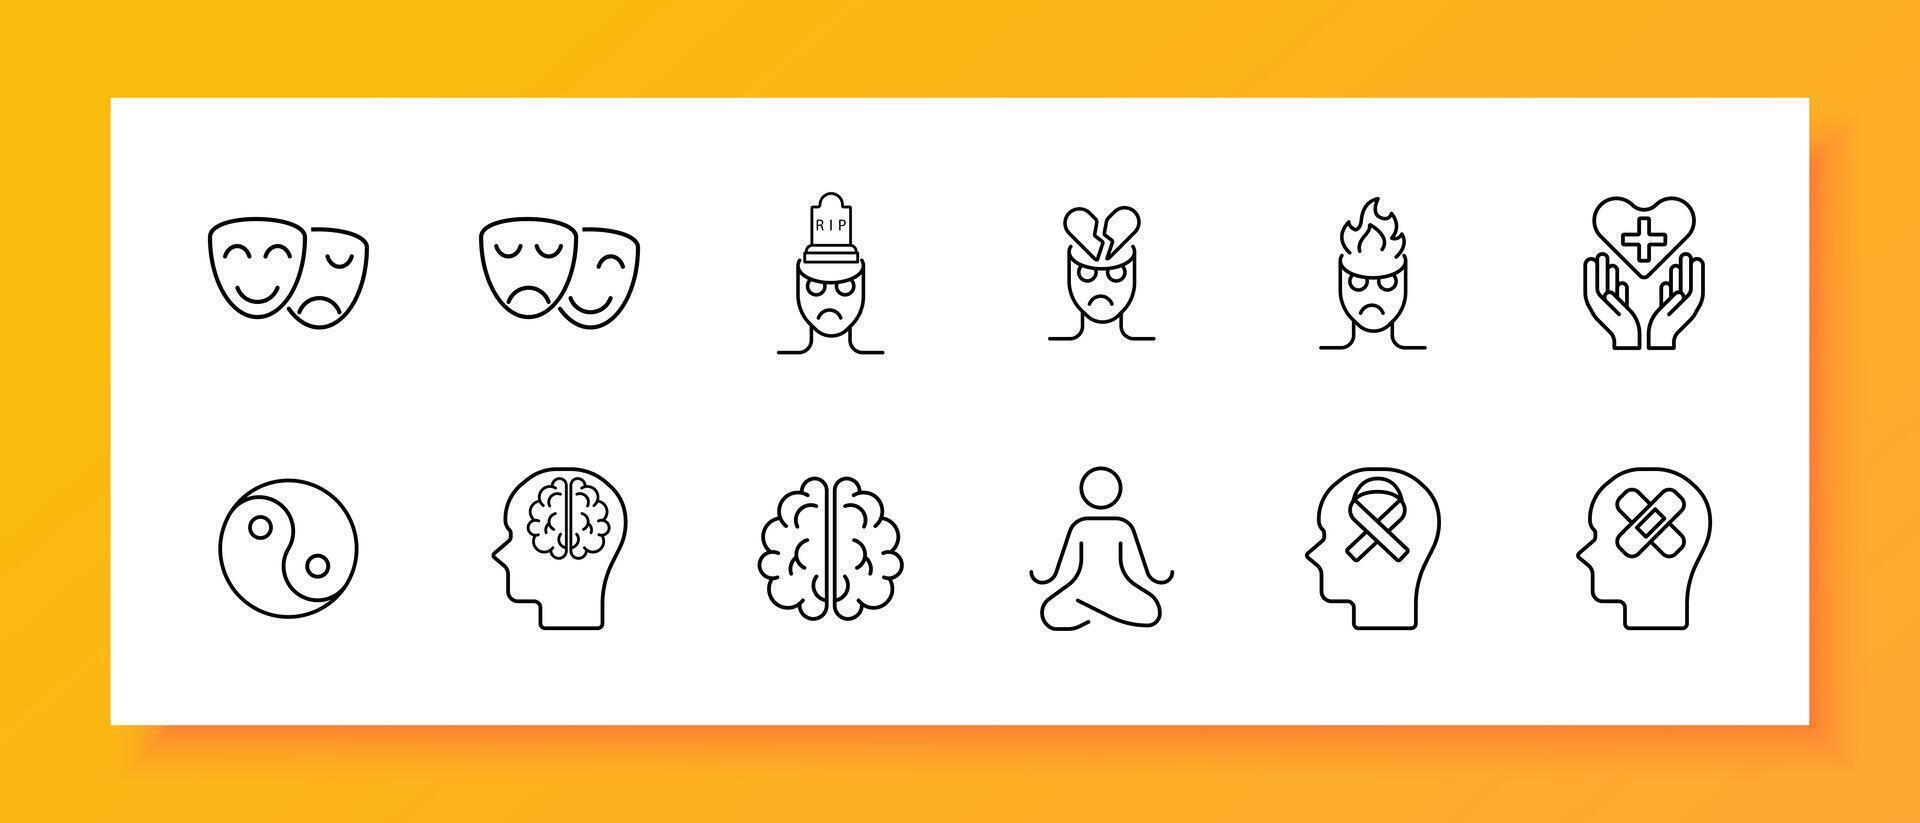 Mood icon set. Theater masks, smile, anger, yin yang, man, brain, fire, meditation, silhouette, sentiment care, patch, restoration, . Controlling your condition concept. line icon. vector